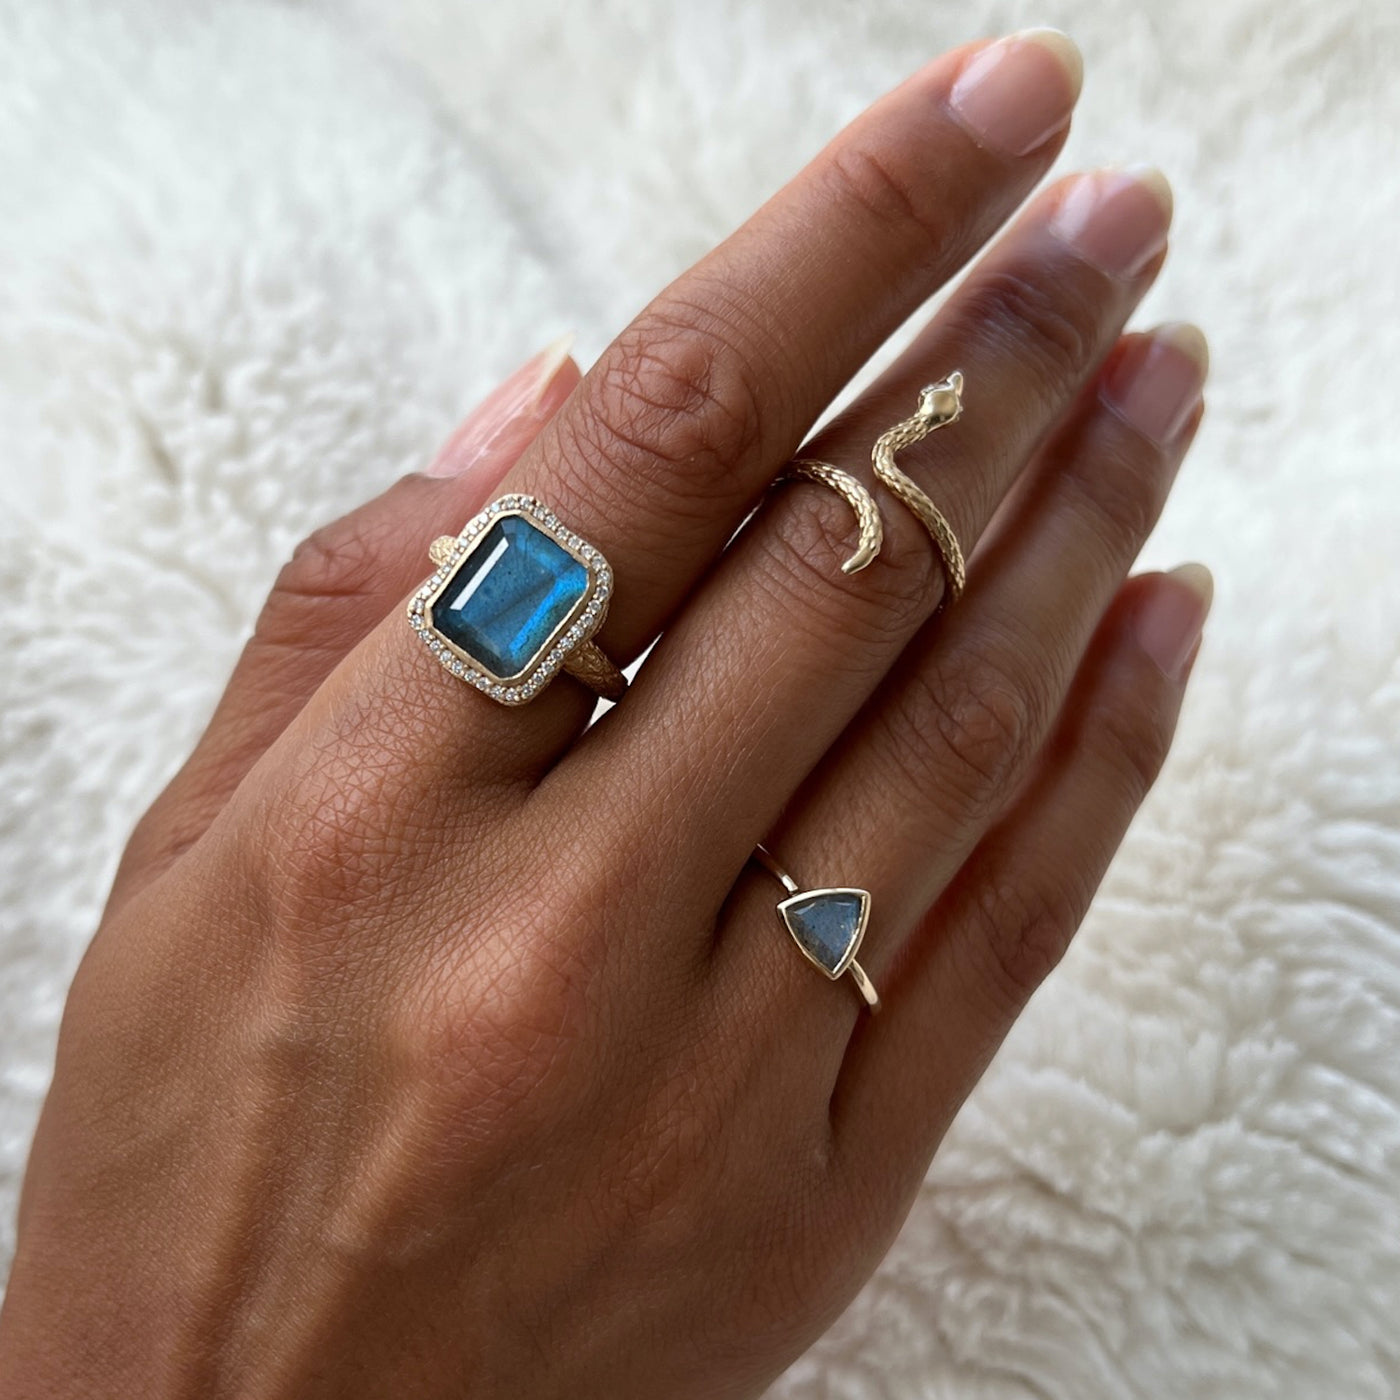 Hand model wearing three rings. The first ring is a emerald cut labradorite with a diamond halo, the second ring is a textured gold snake ring, the third ring is a trillion cut labradorite.